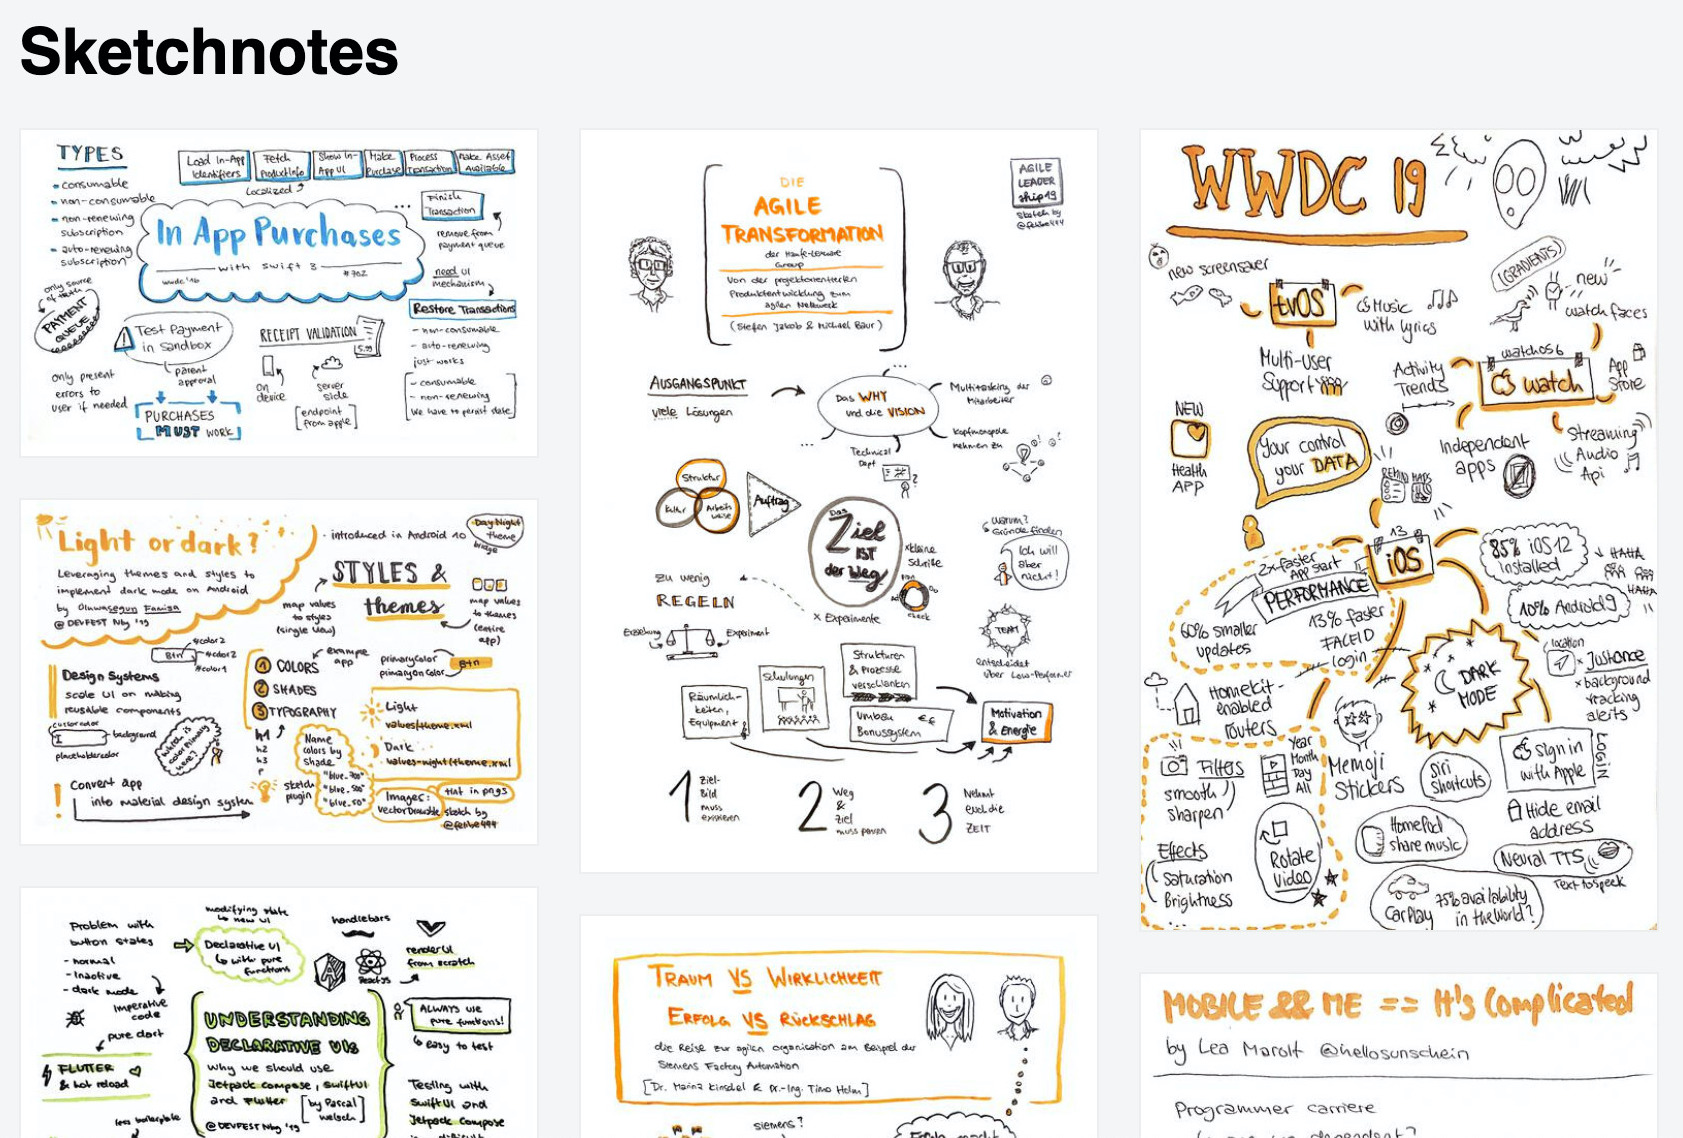 NotesA sketch plugin for taking notes by Jason Cashdollar on Dribbble